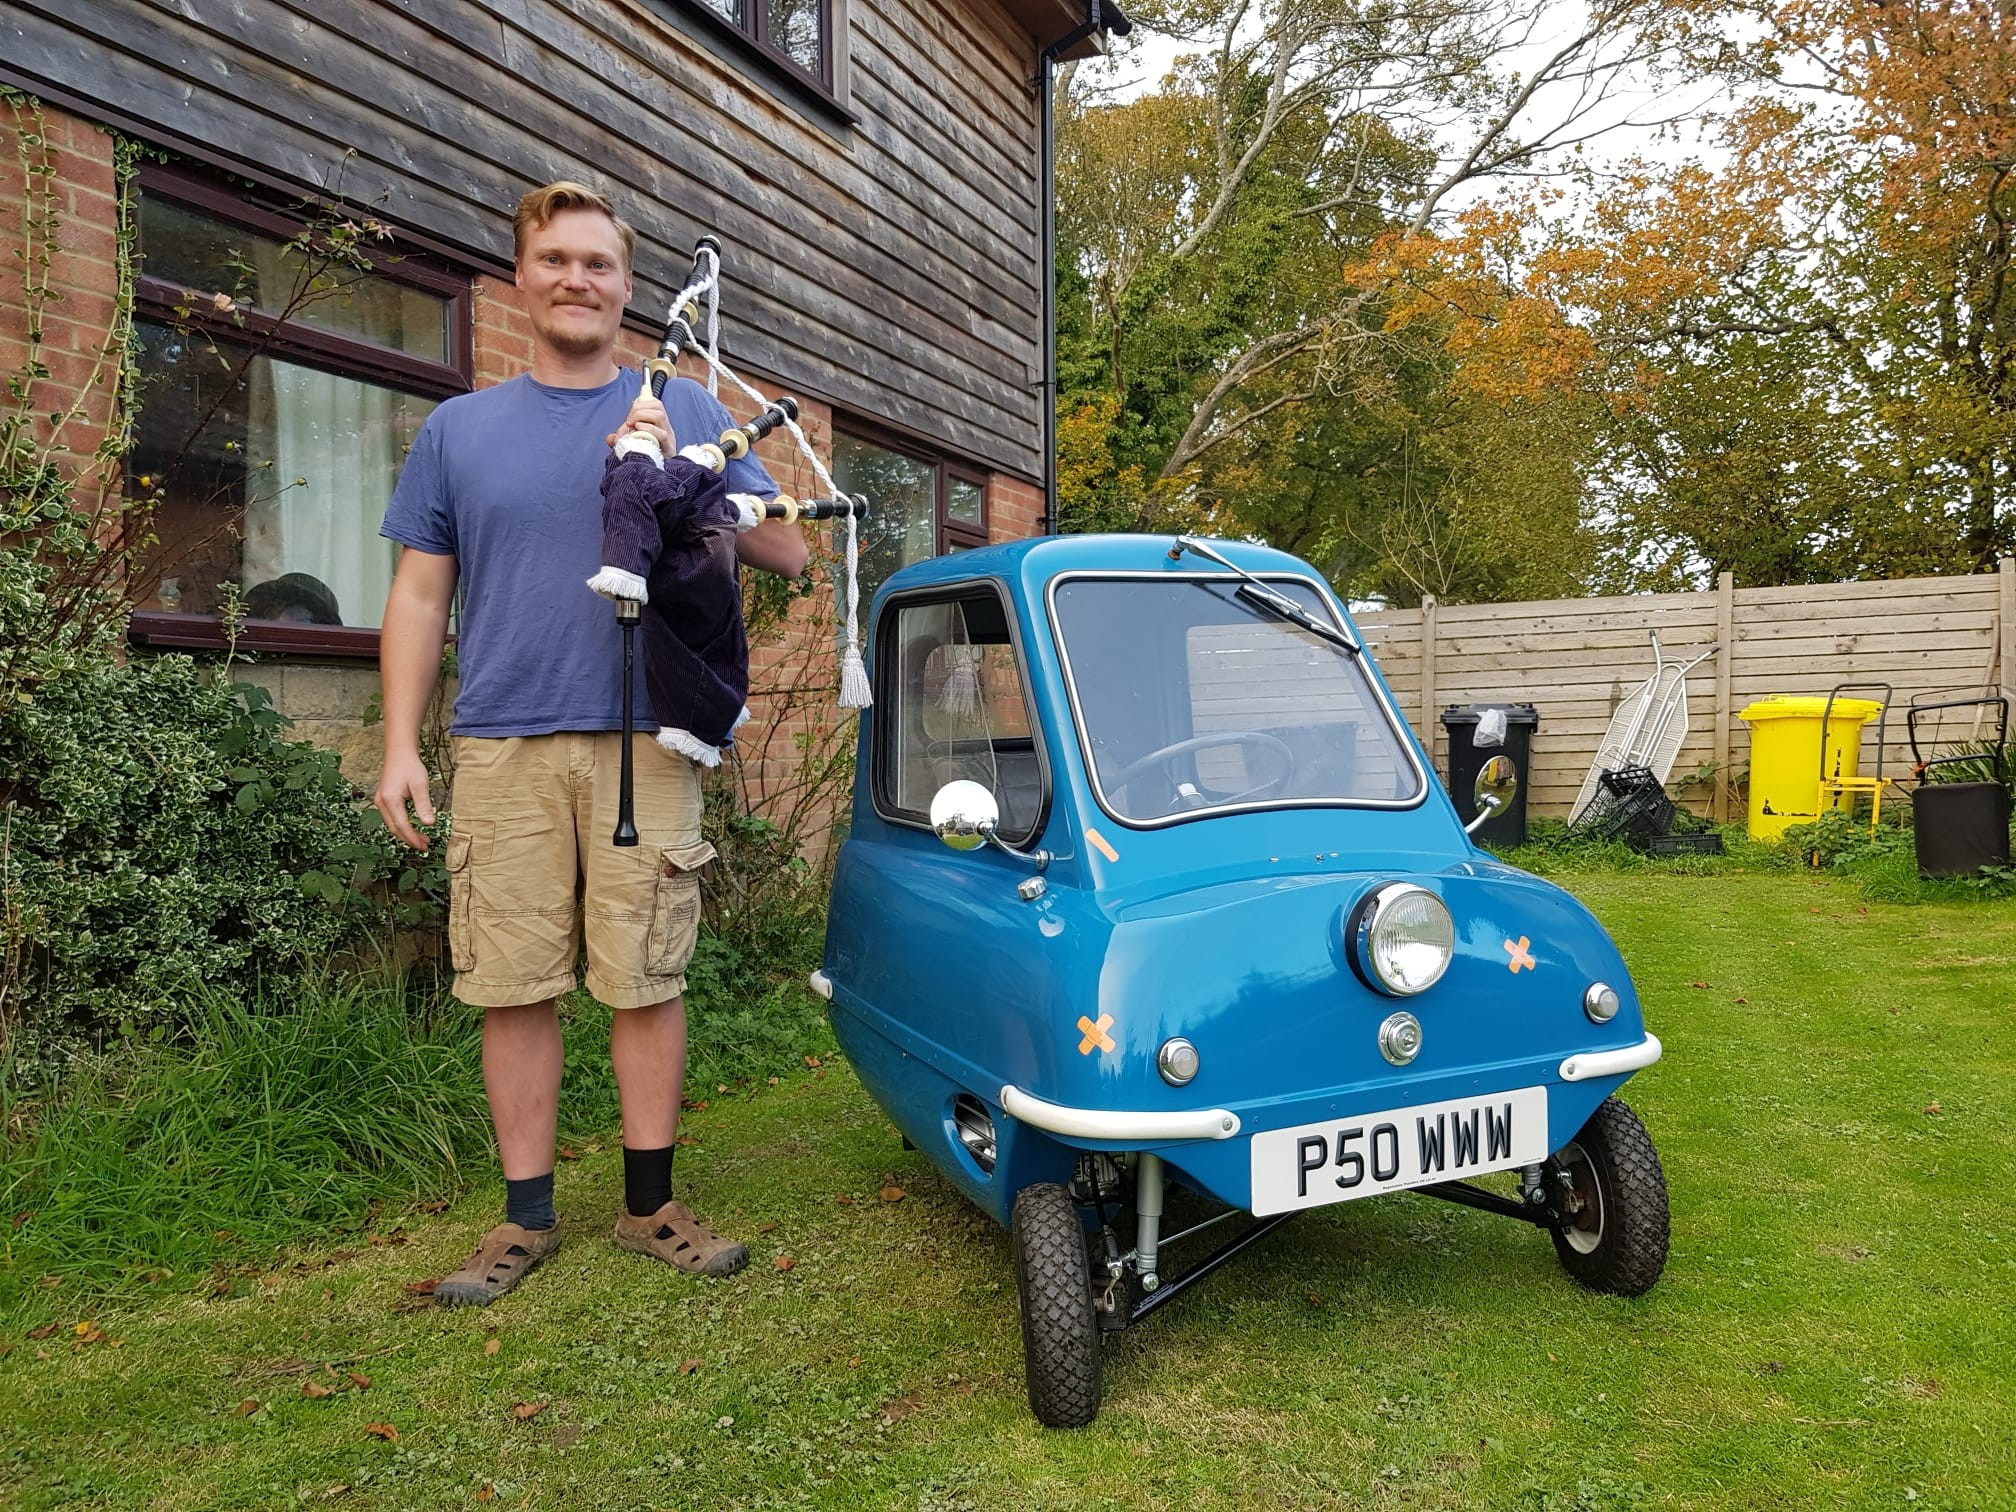 Guy Crosses Britain in Smallest Car, a Record-Setting for Charity autoevolution